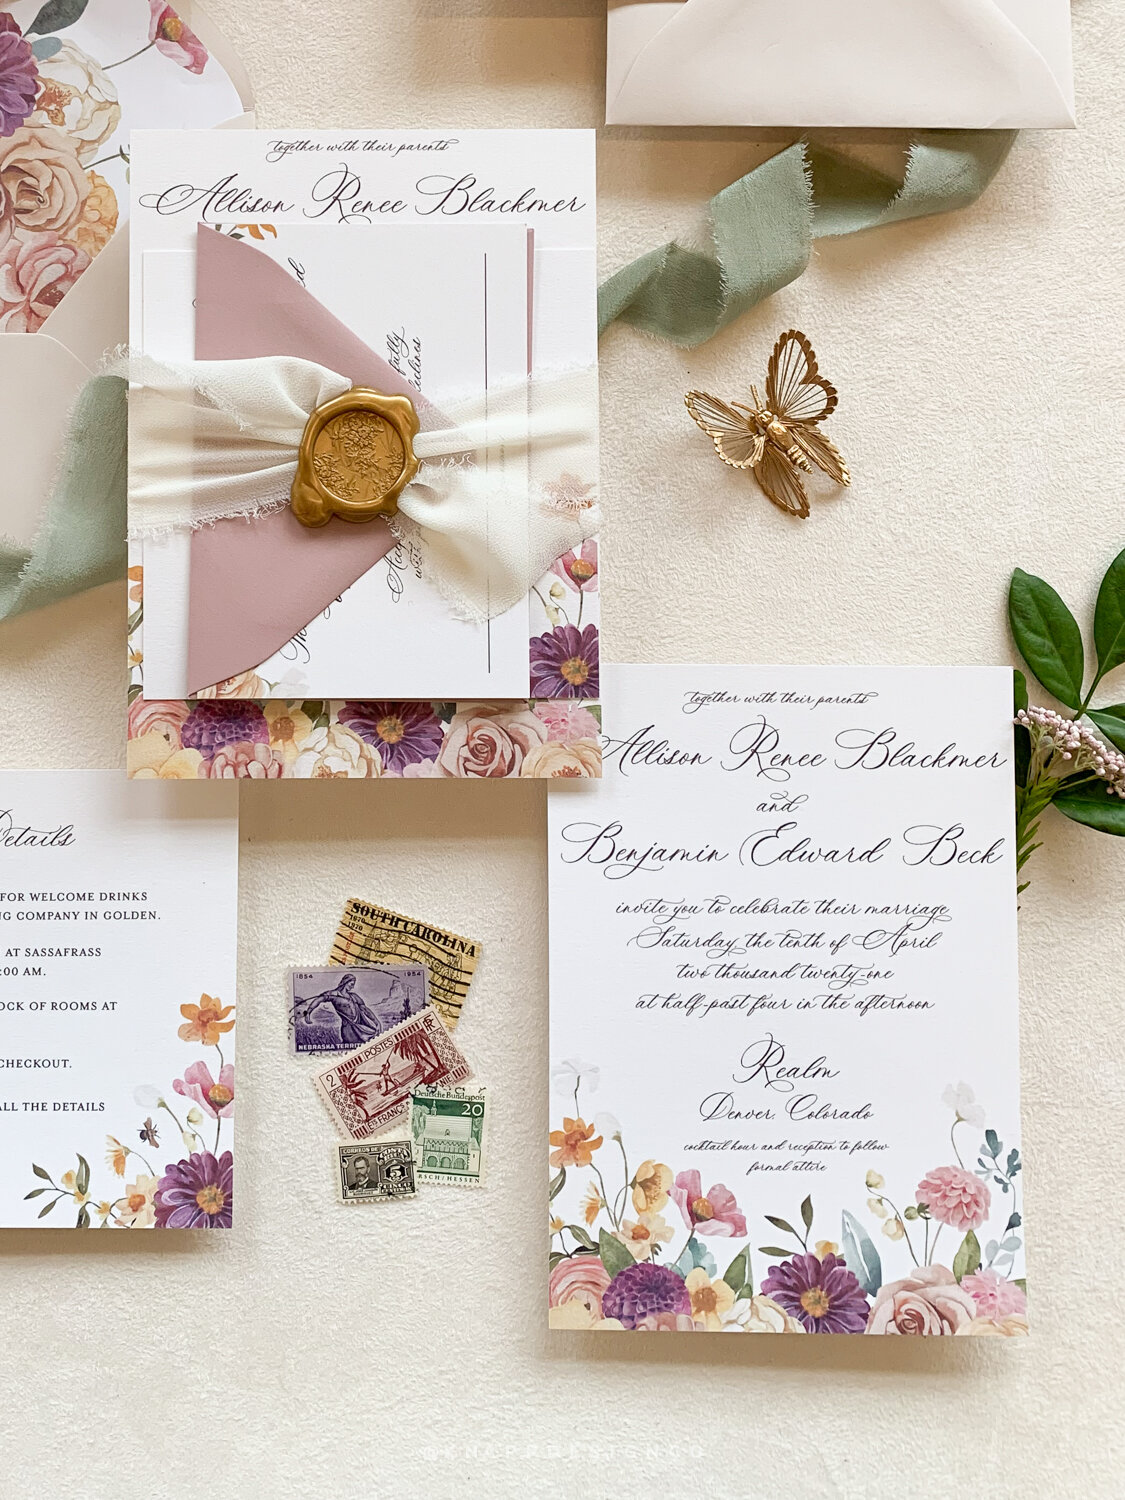 An invitation card includes the who, when, and where of the wedding!